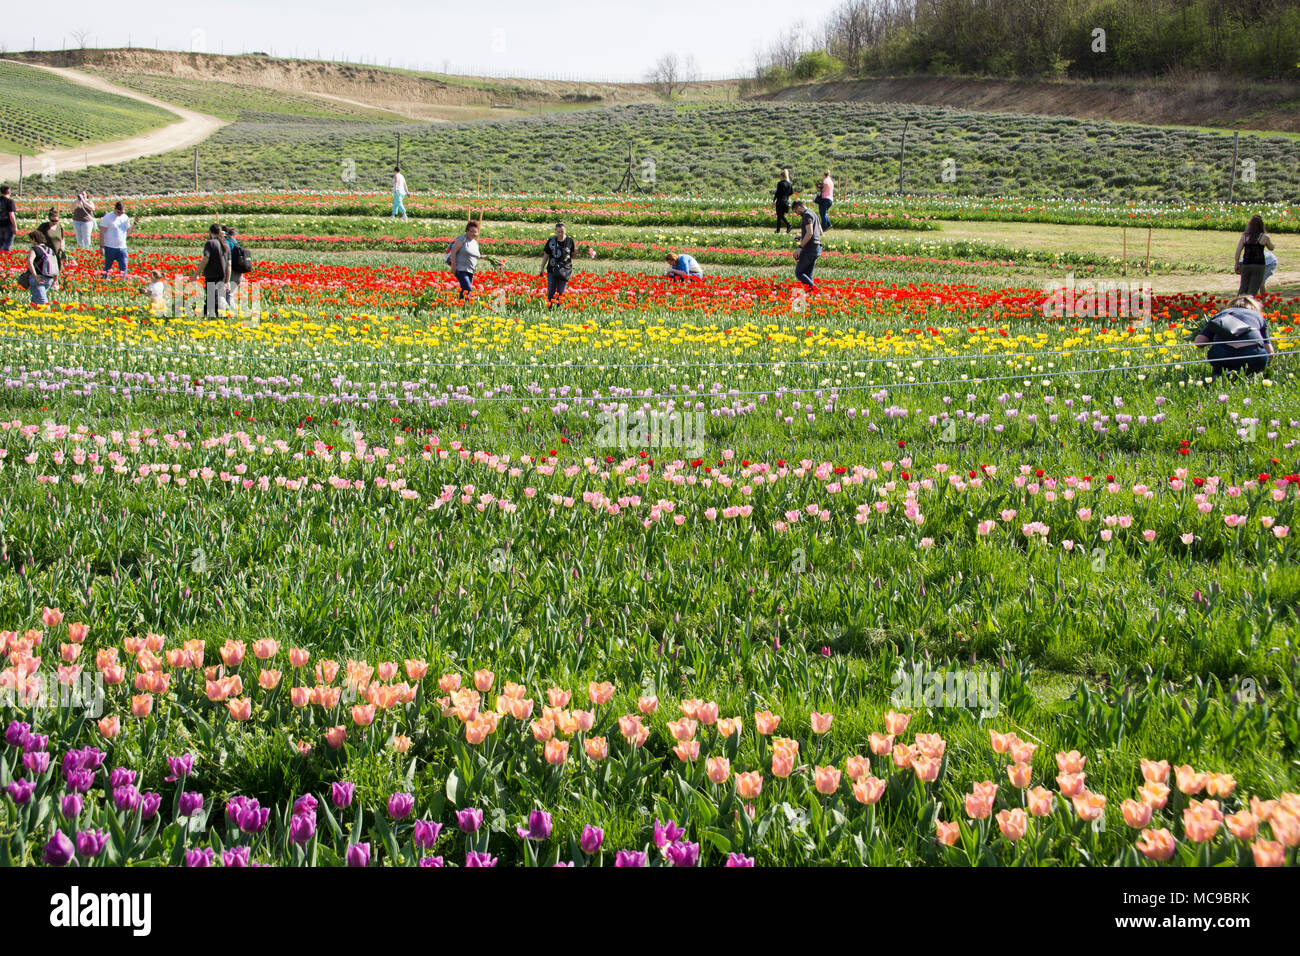 People picking tulips and daffodils in Hungary Stock Photo